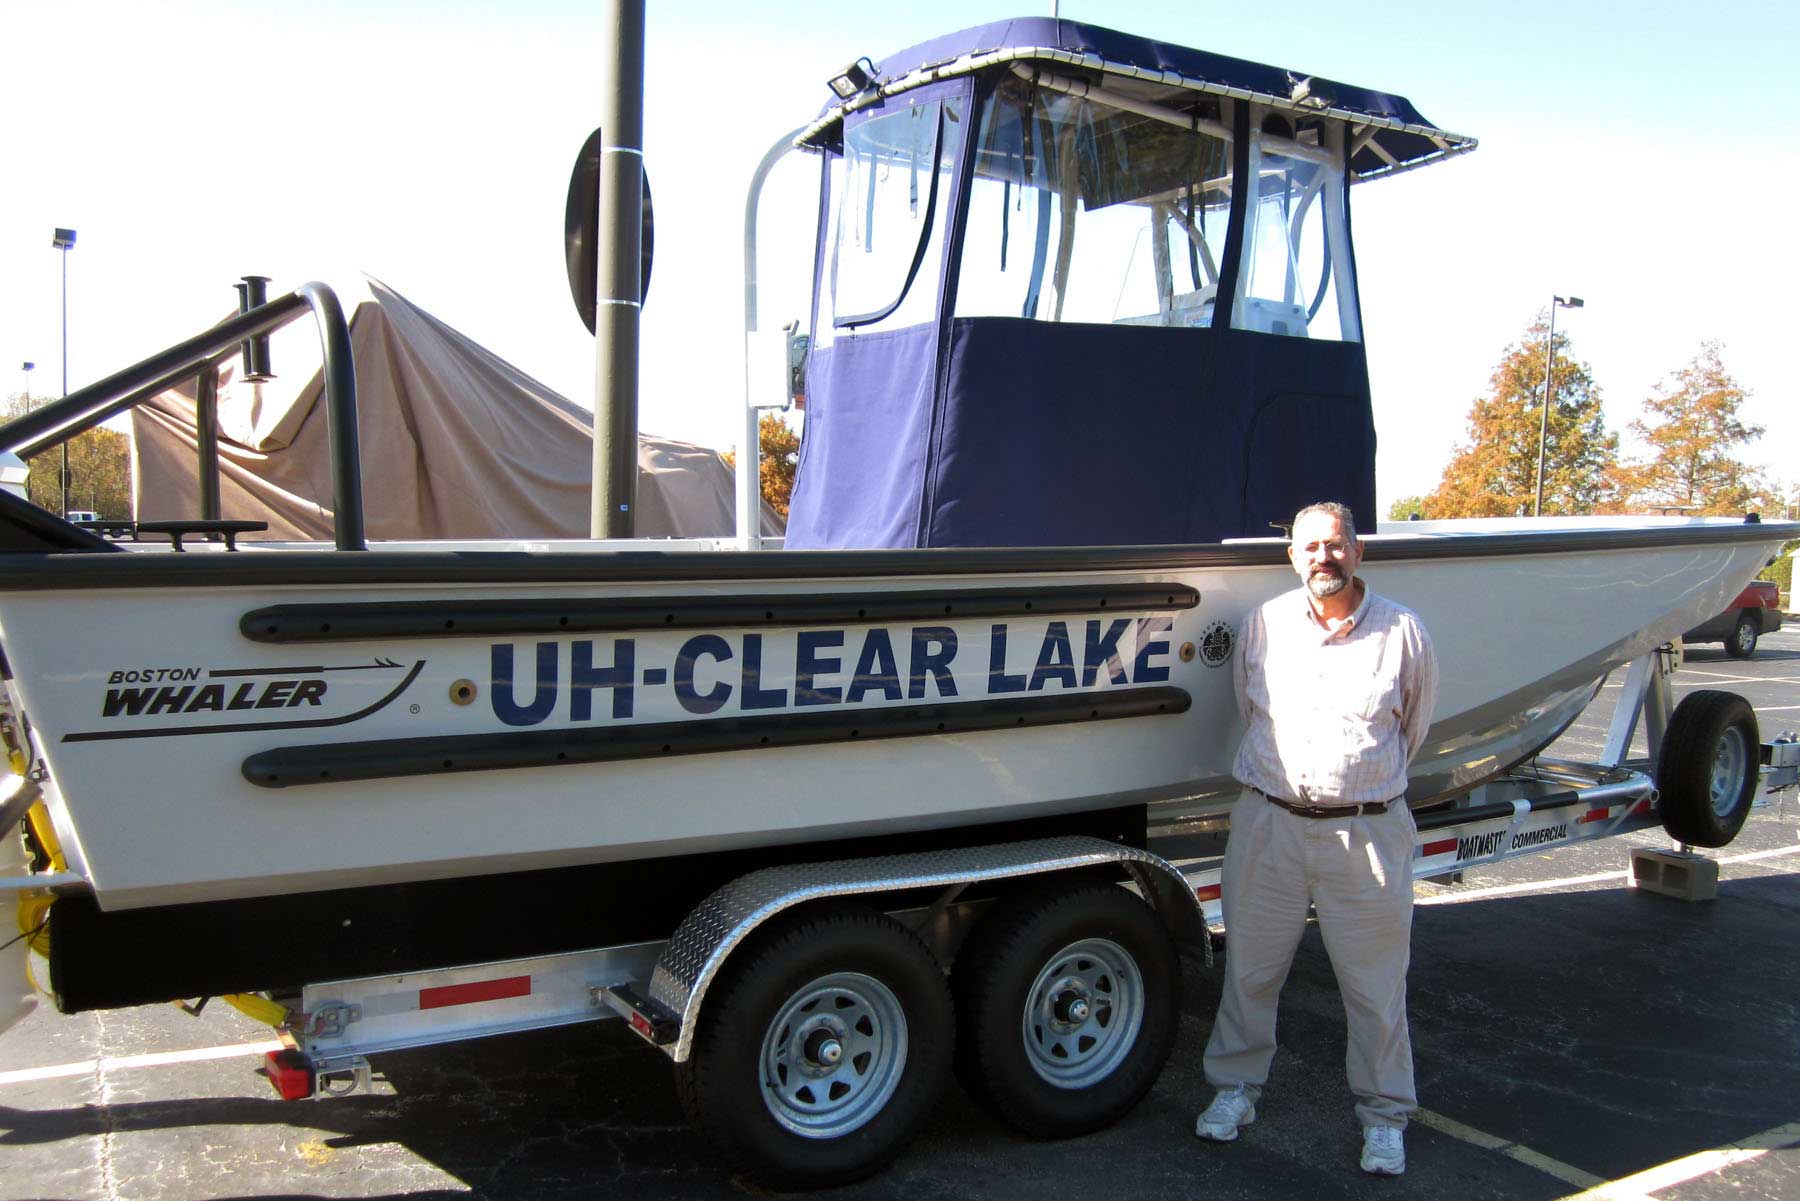 Dr. George Guillen, pictured with a 25-foot Boston Whaler